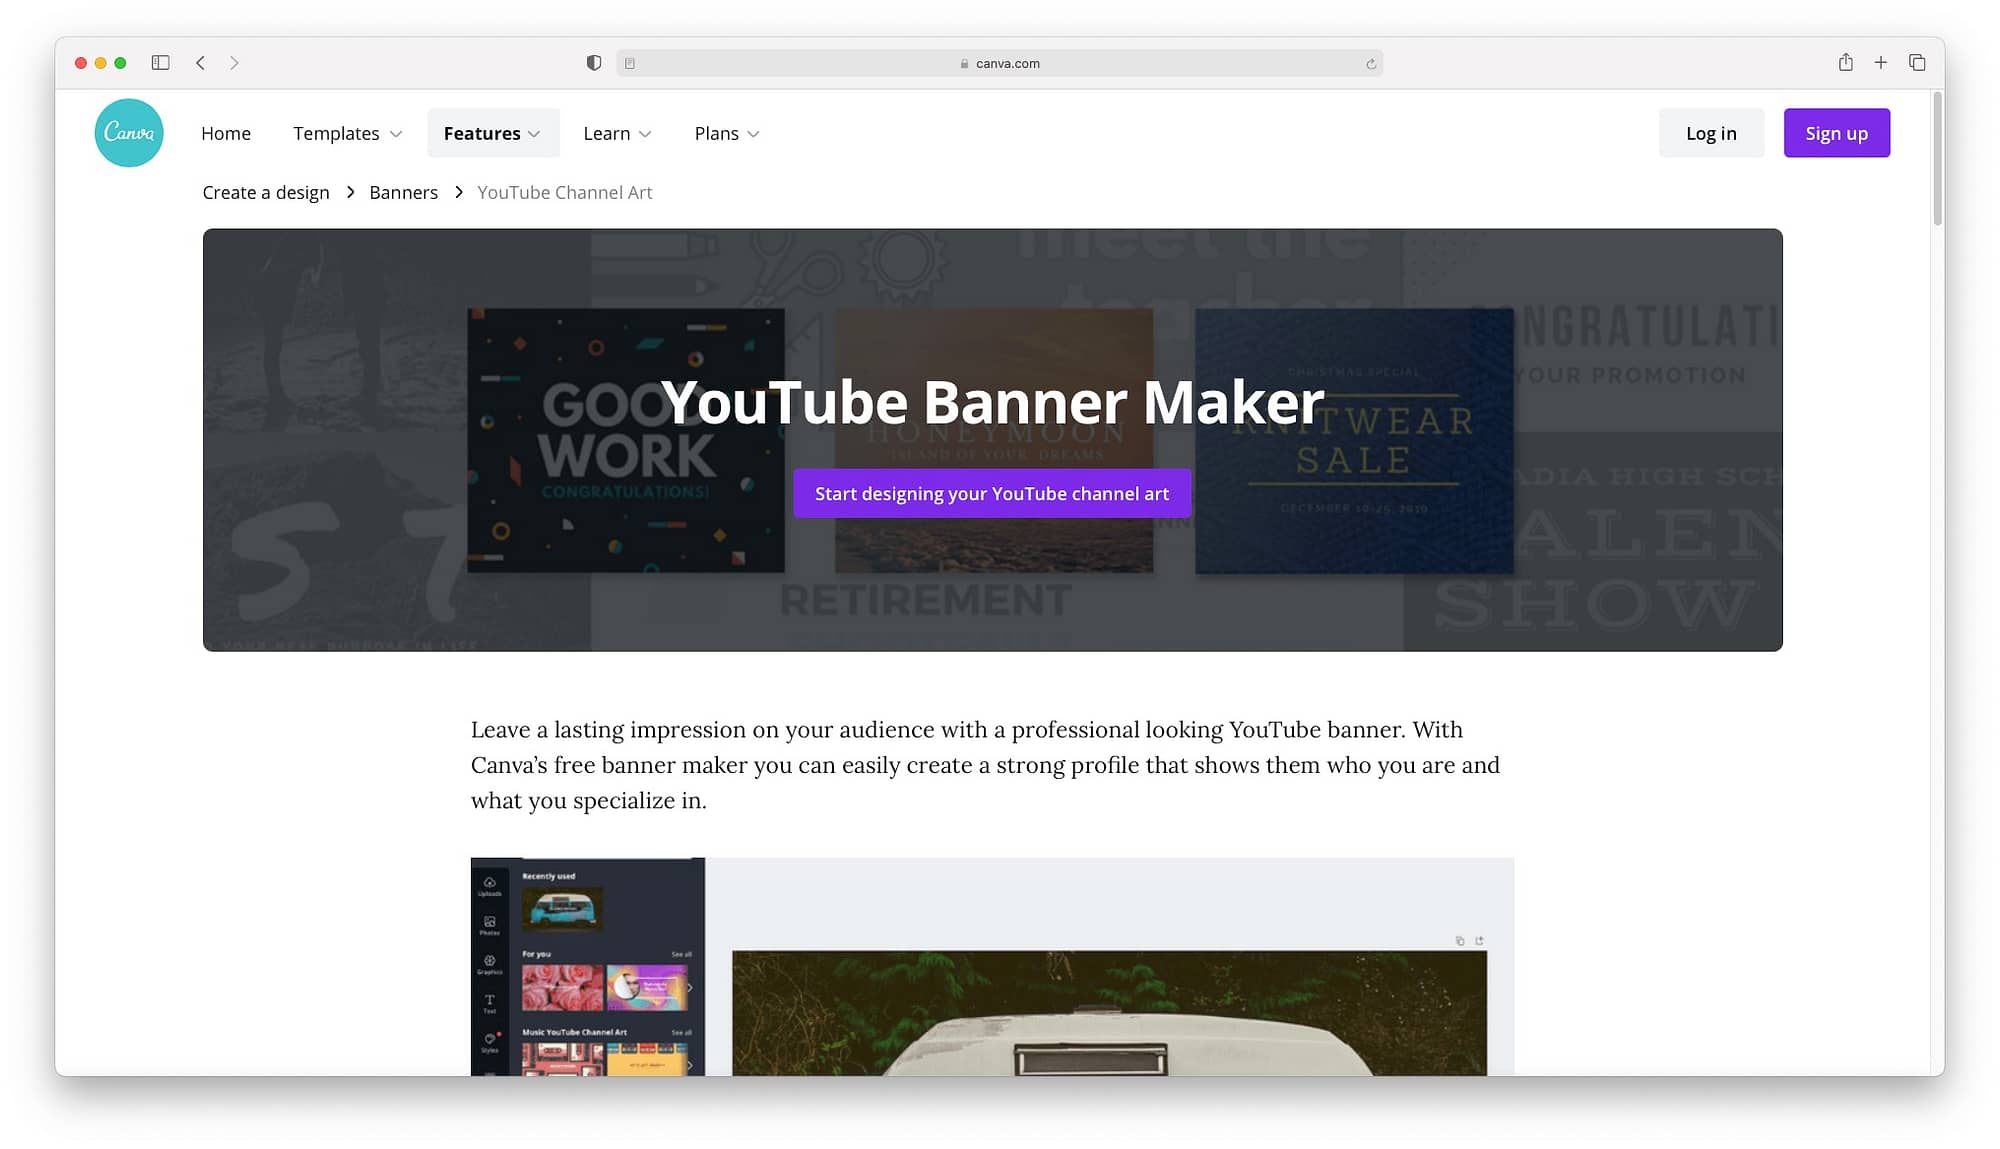 Canva is still one of the best YouTube banner makers available